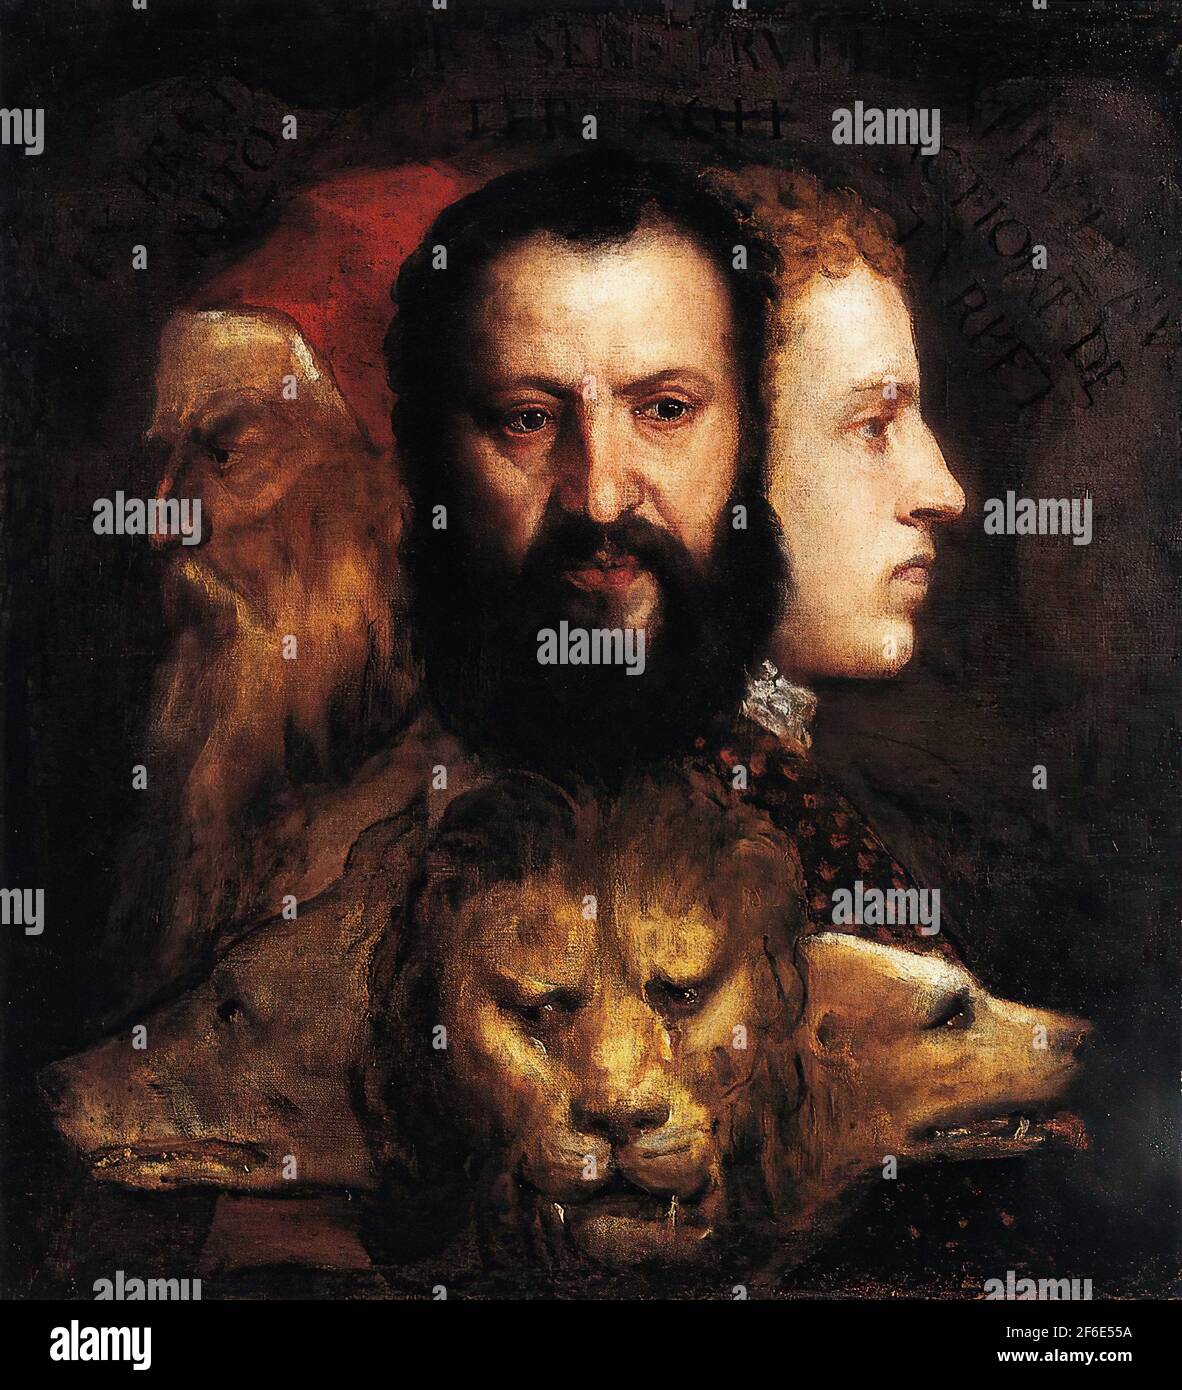 Tiziano Vecelli or Vecellio a.k.a Titian - Allegory Time Governed Prudence C 1565 Stock Photo